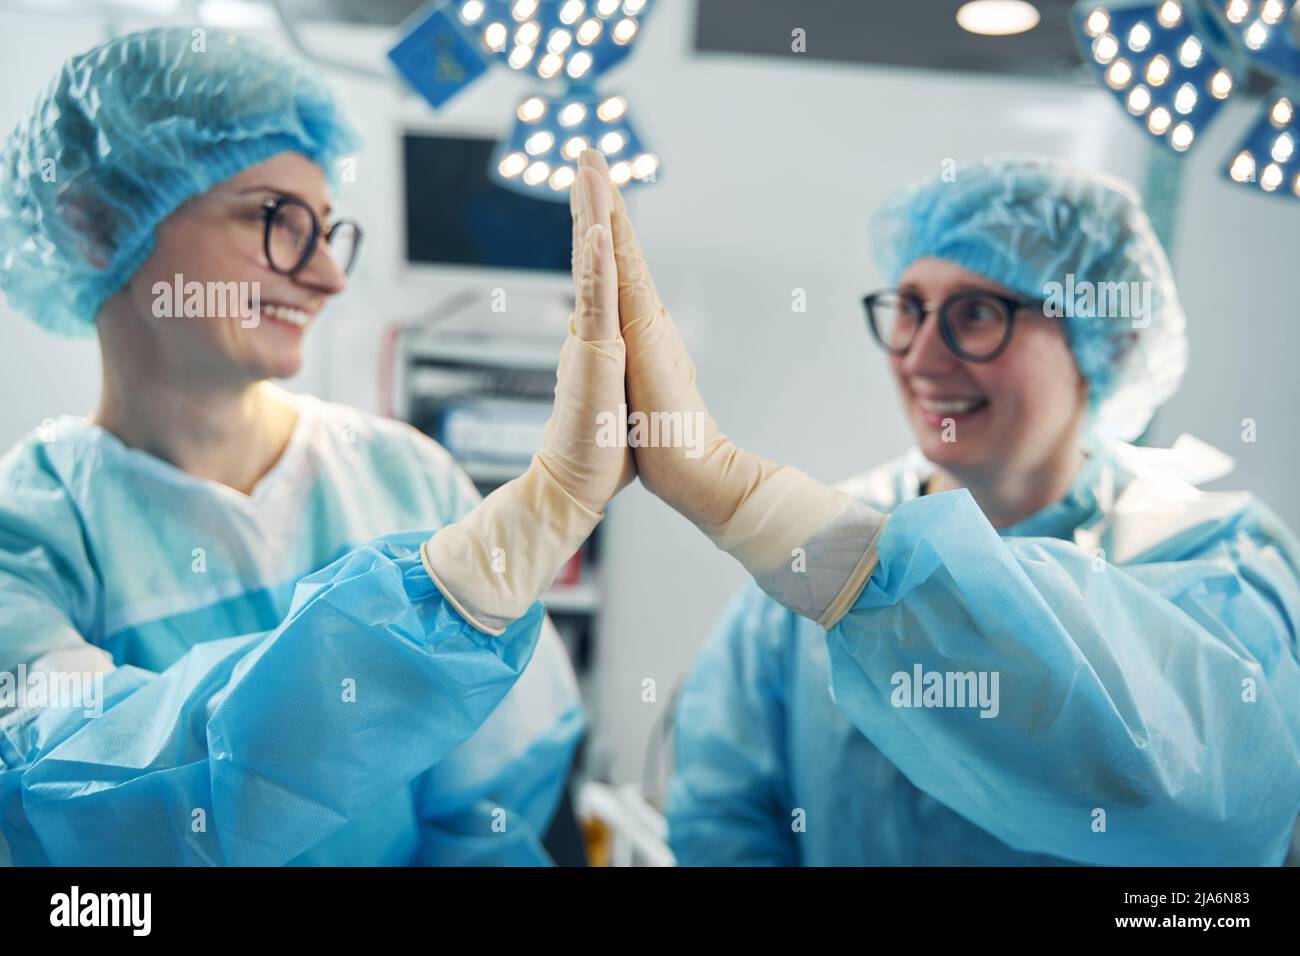 Cheerful nurses slapping their palms in high five Stock Photo